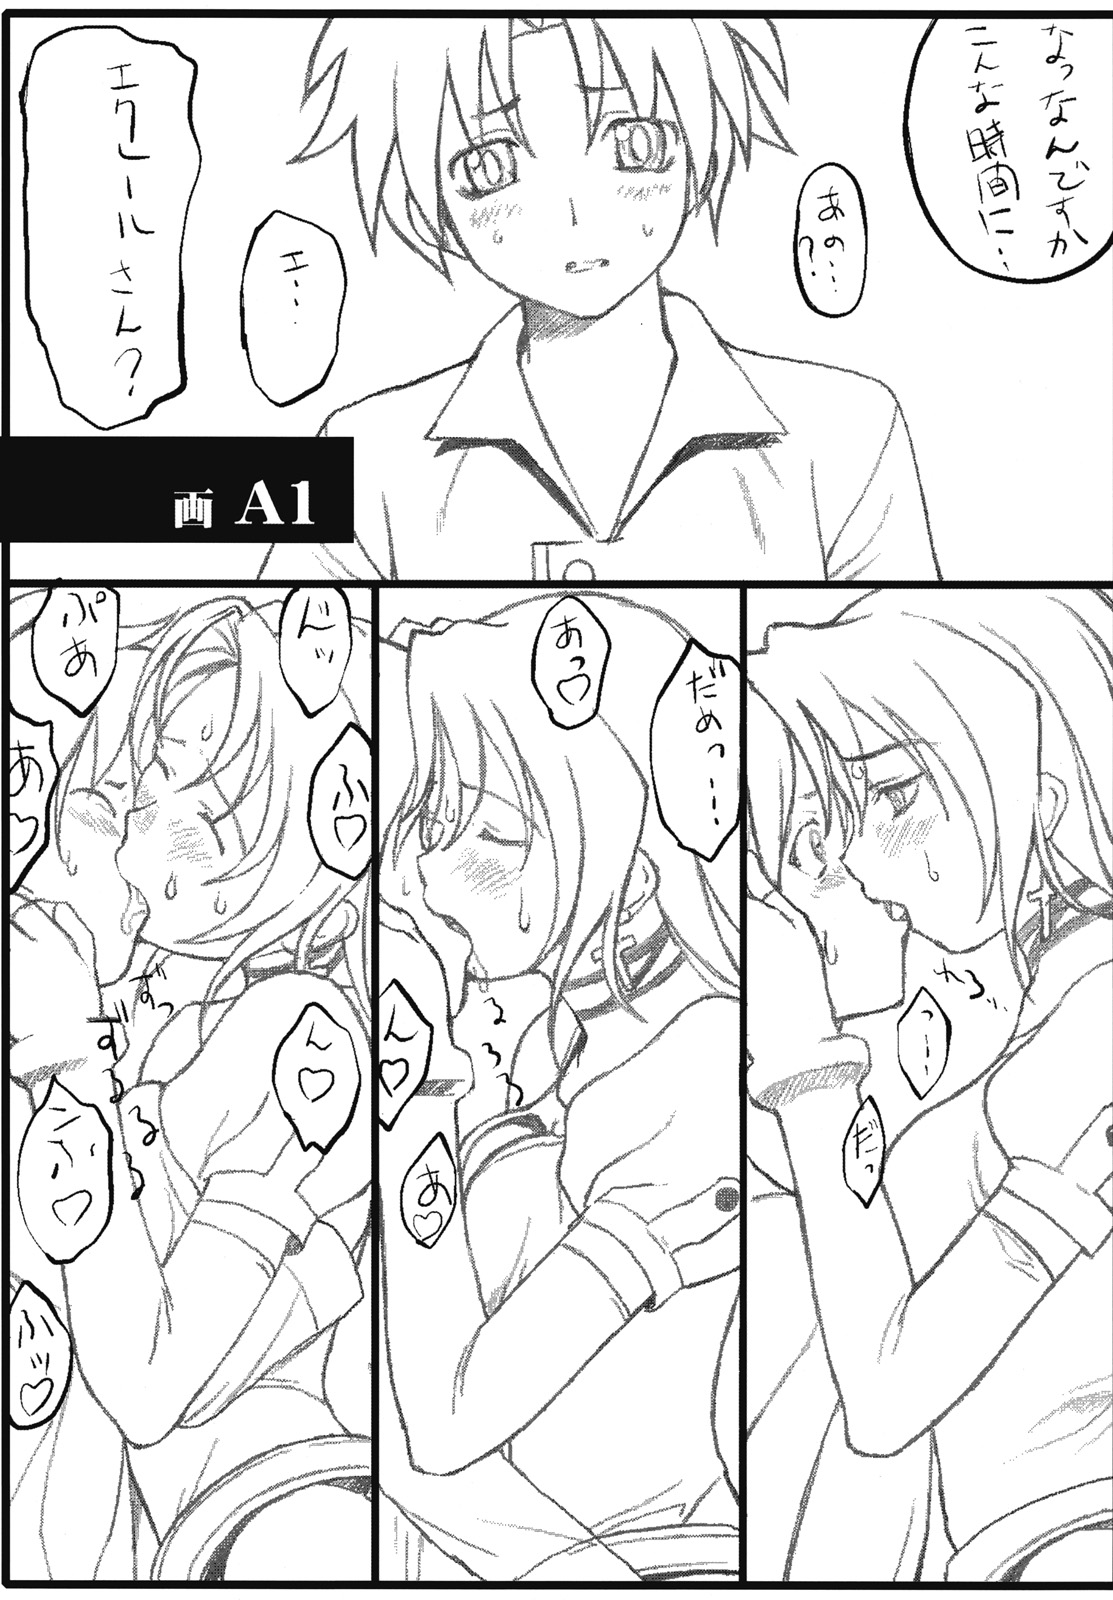 (SC32) [AXZ (Various)] UNDER RED E2 (Kiddy Grade) page 16 full